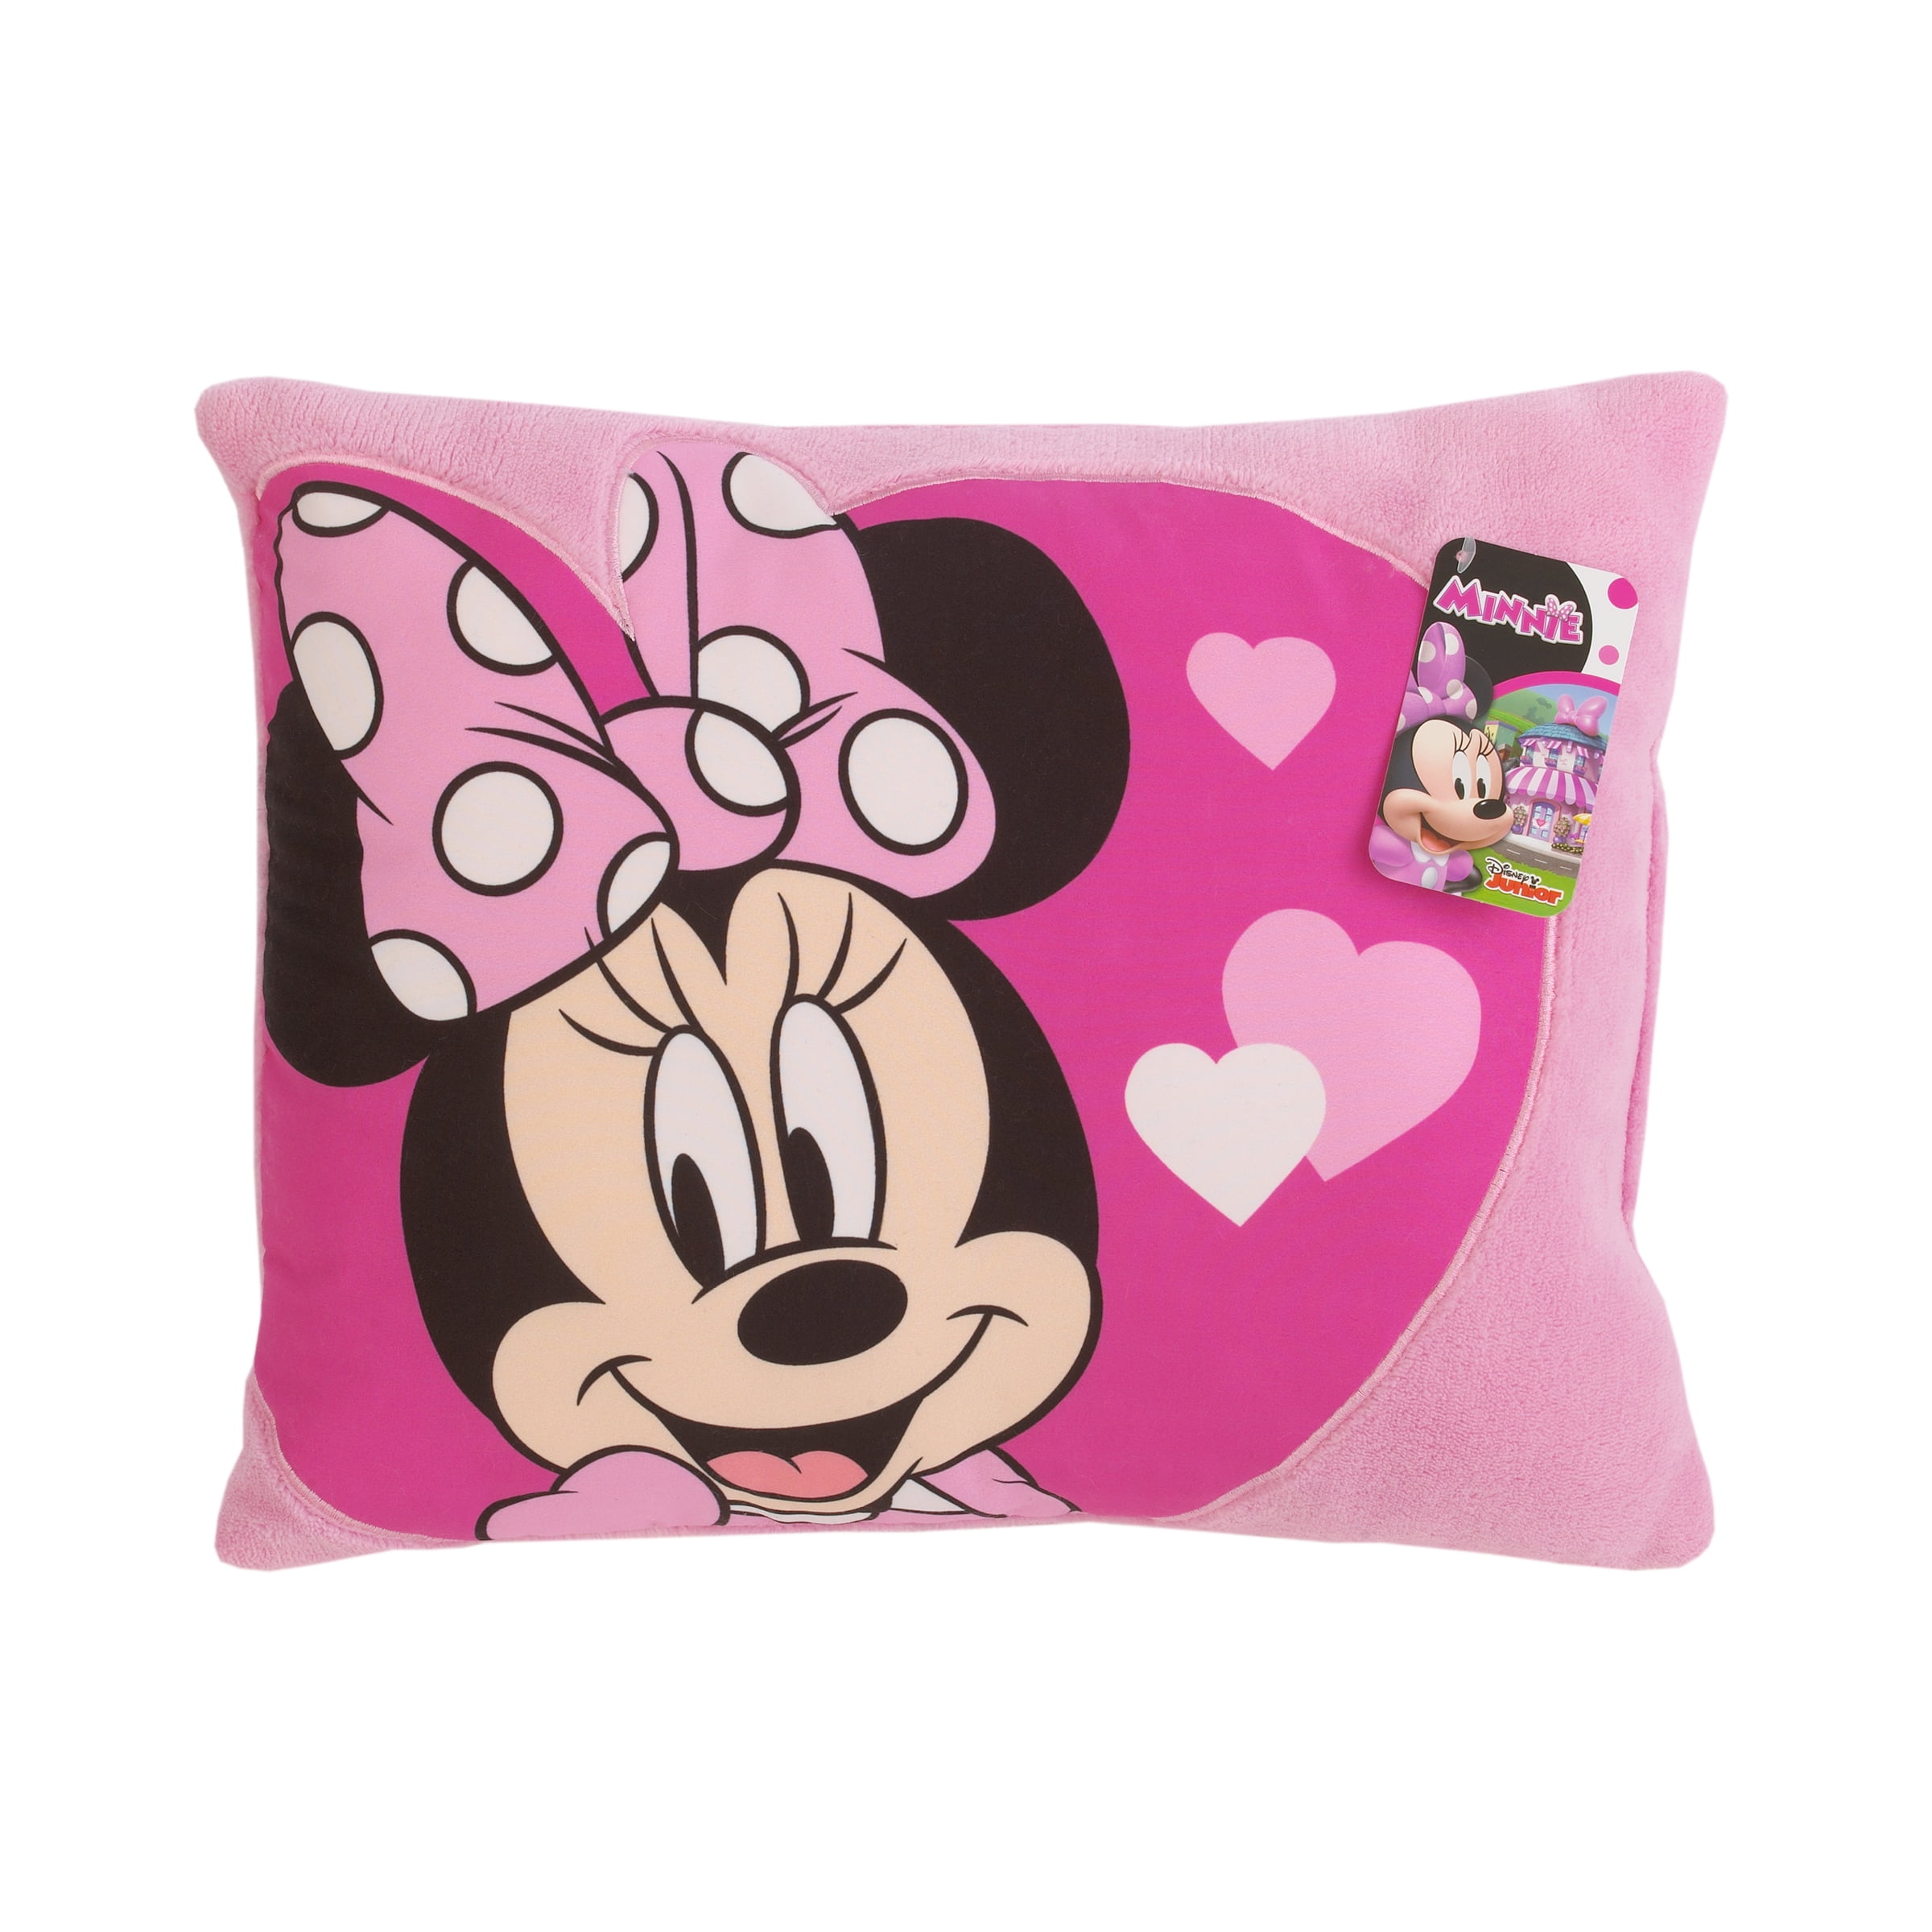 Disney Minnie Mouse Blue and White Gingham Print Pillow Sham